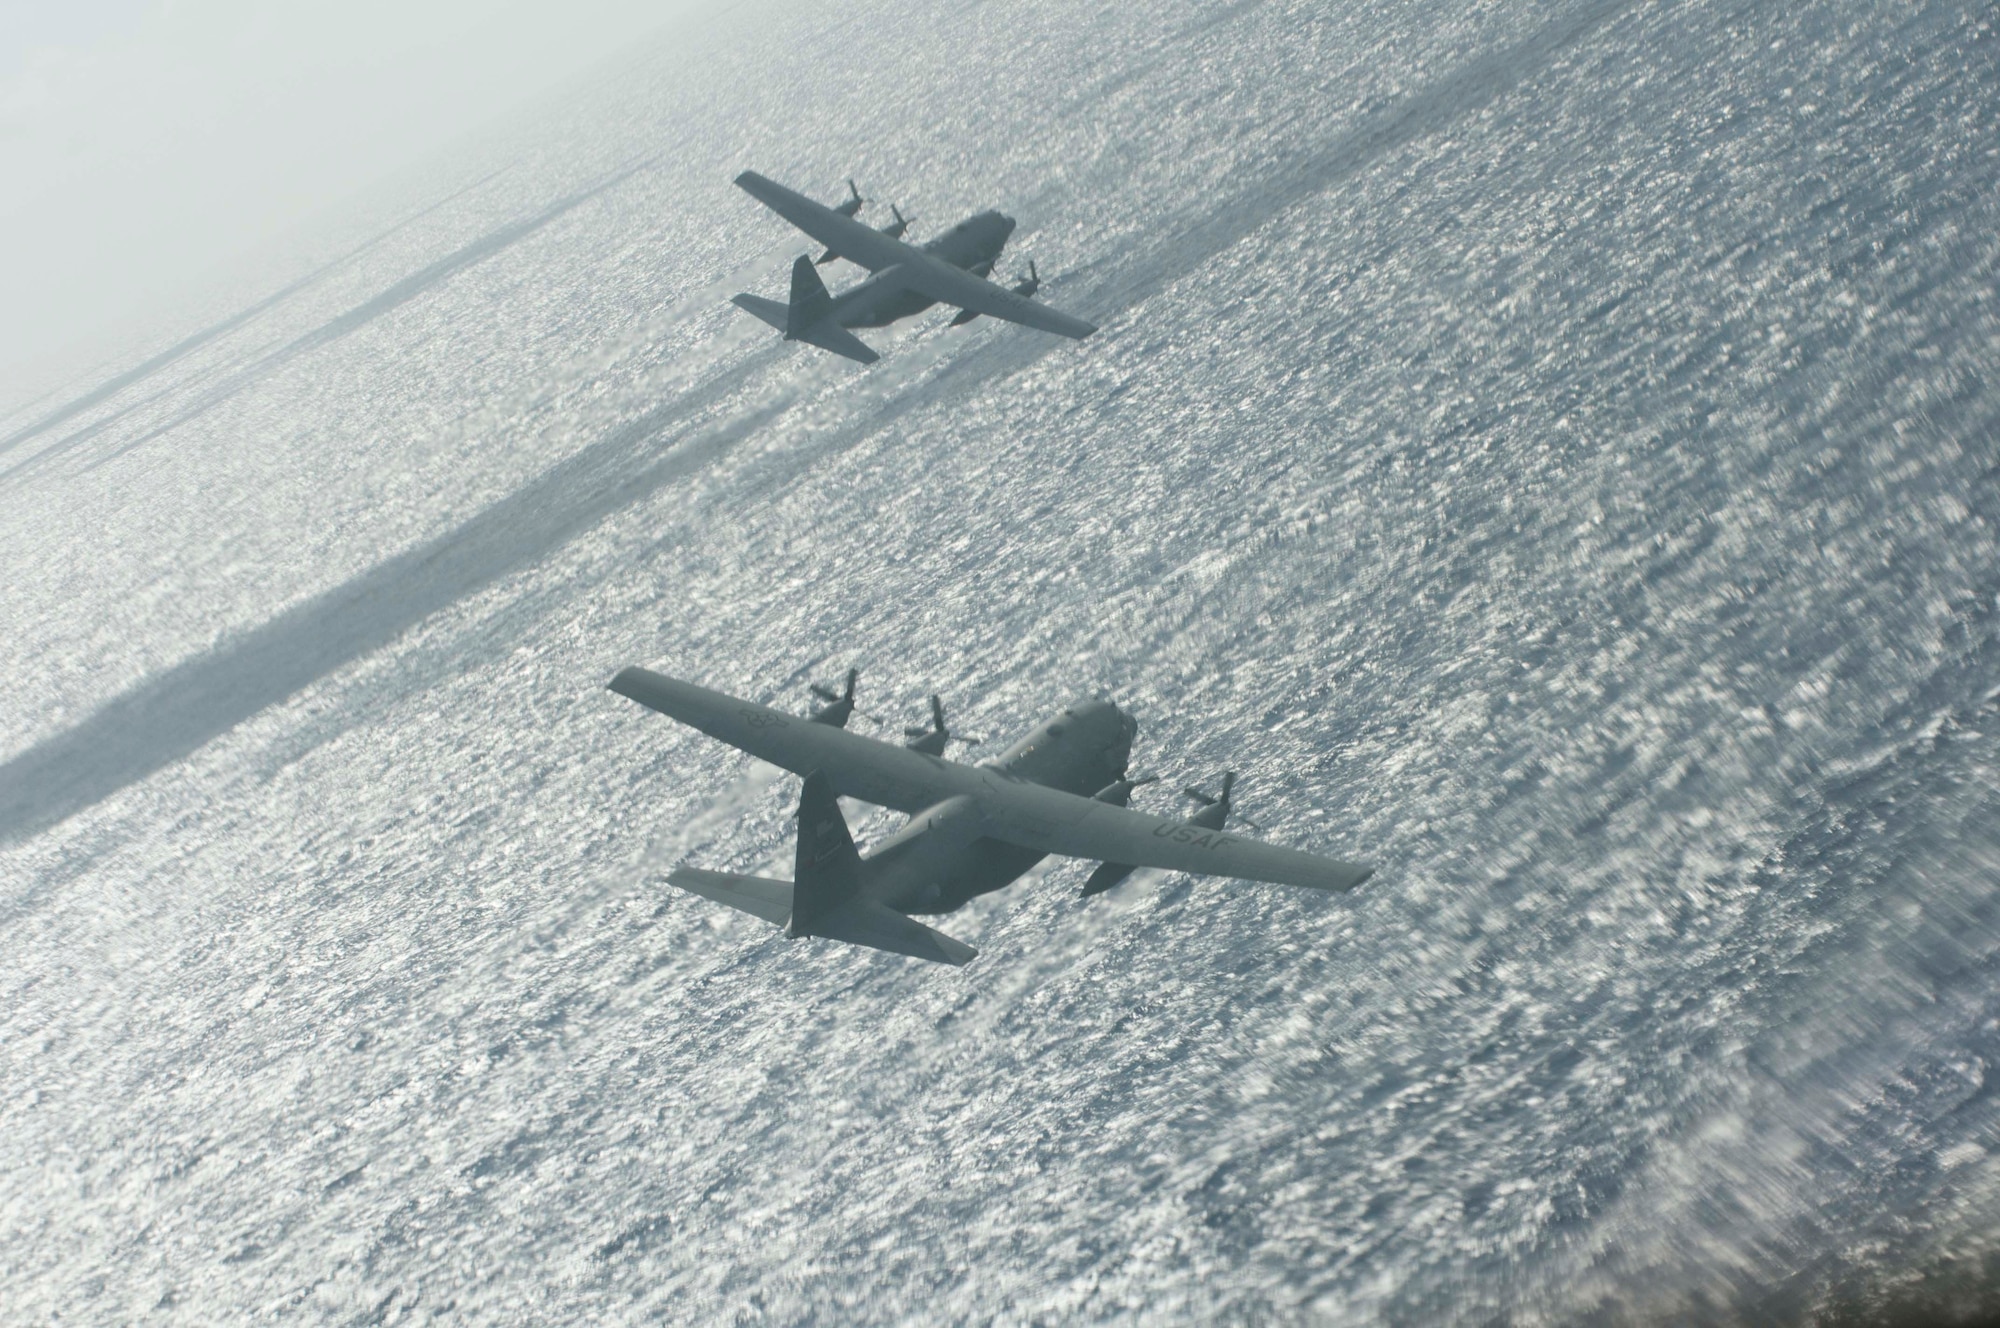 A flight of two C-130 Hercules aircraft from the Georgia Air National Guard's 165th Airlift Wing bank right while being escorted to a drop zone by fighter aircraft during Sentry Aloha at Joint Base Pearl Harbor-Hickam, Hawaii on Aug. 29 2016. Sentry Aloha exercises are held several times a year with the first one normally starting towards the beginning of the calendar year. (U.S. Air National Guard photo by Airman 1st Class Stan Pak/released)